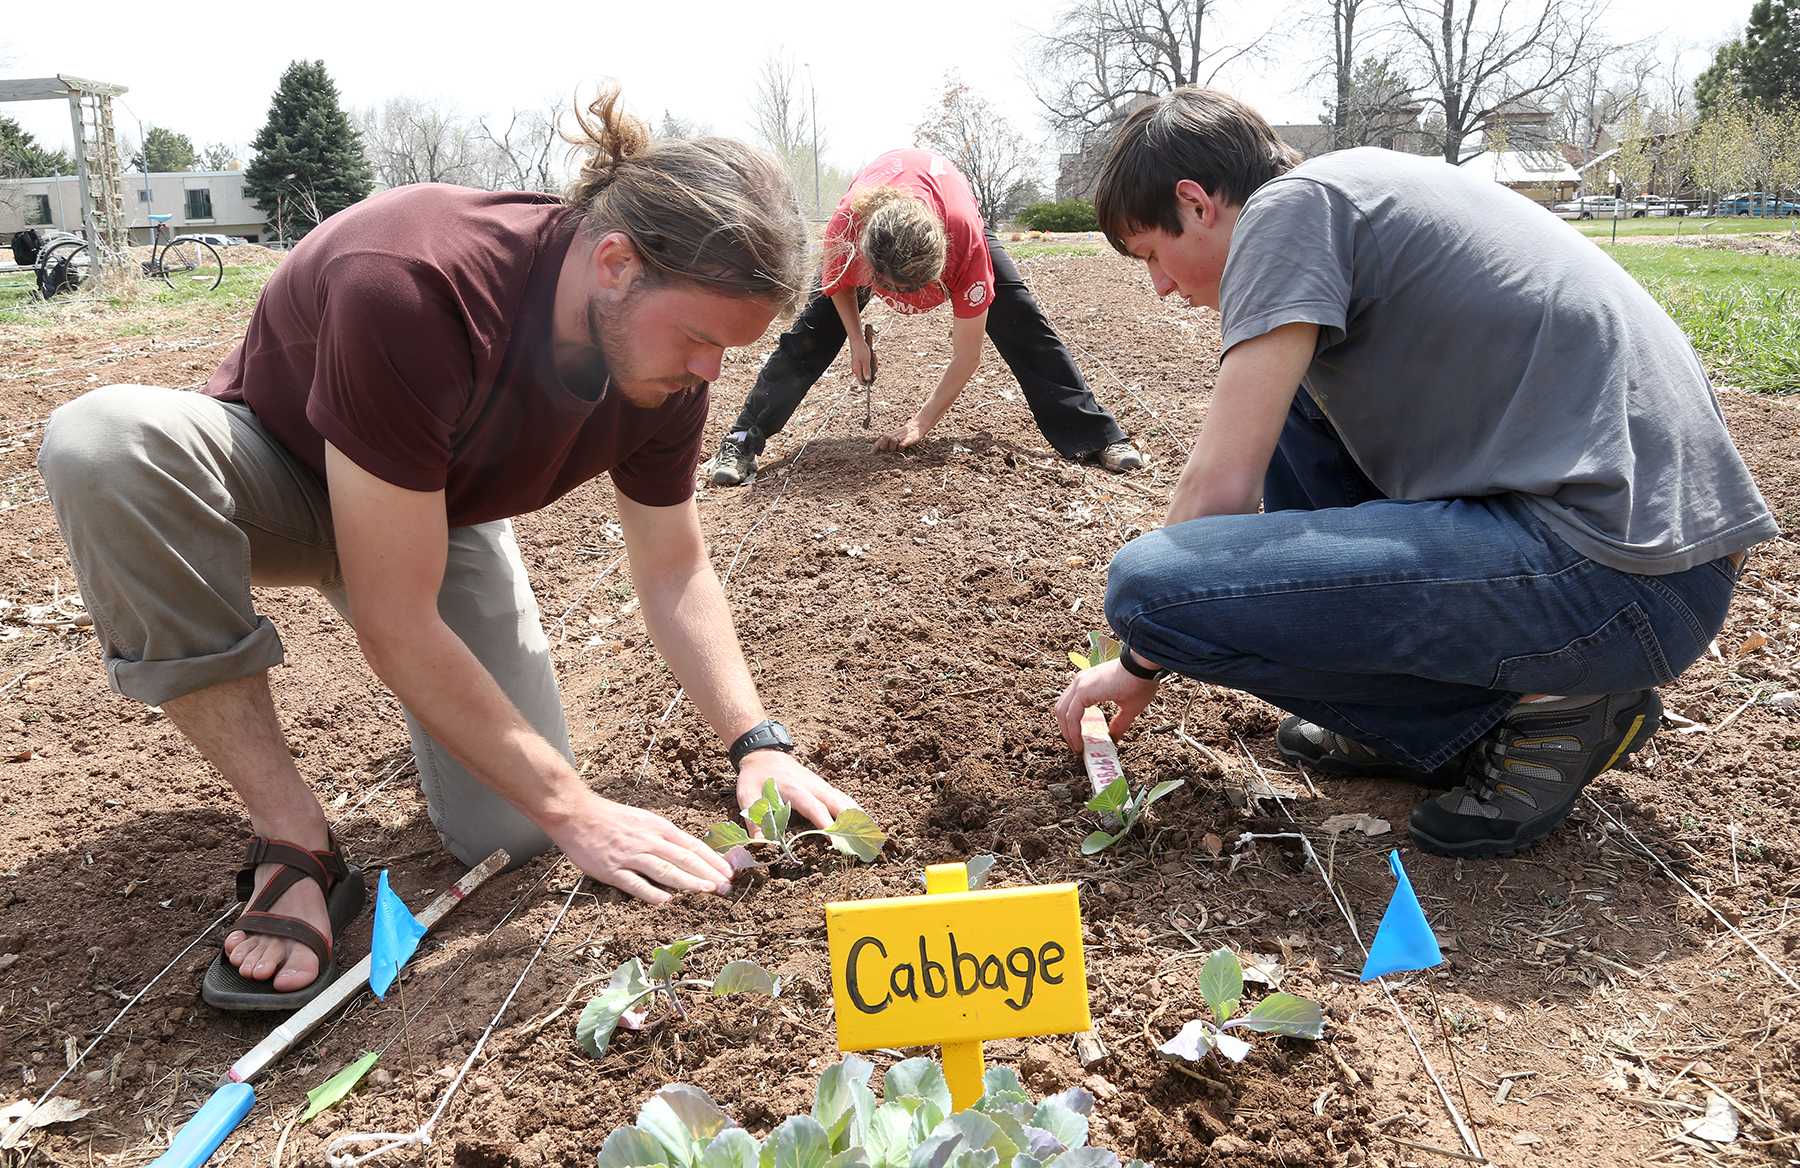 Junior wildlife biology major Brent Pease, left, Agriculture graduate student Amy Kousch, center, and sophmore soil and crop science major Colton Heeney plant cabbage in the student sustainable farm yesterday afternoon. The student run farm grows a variety of fruits, vegtables and other plants and has done so for the last 16 growing seasons.